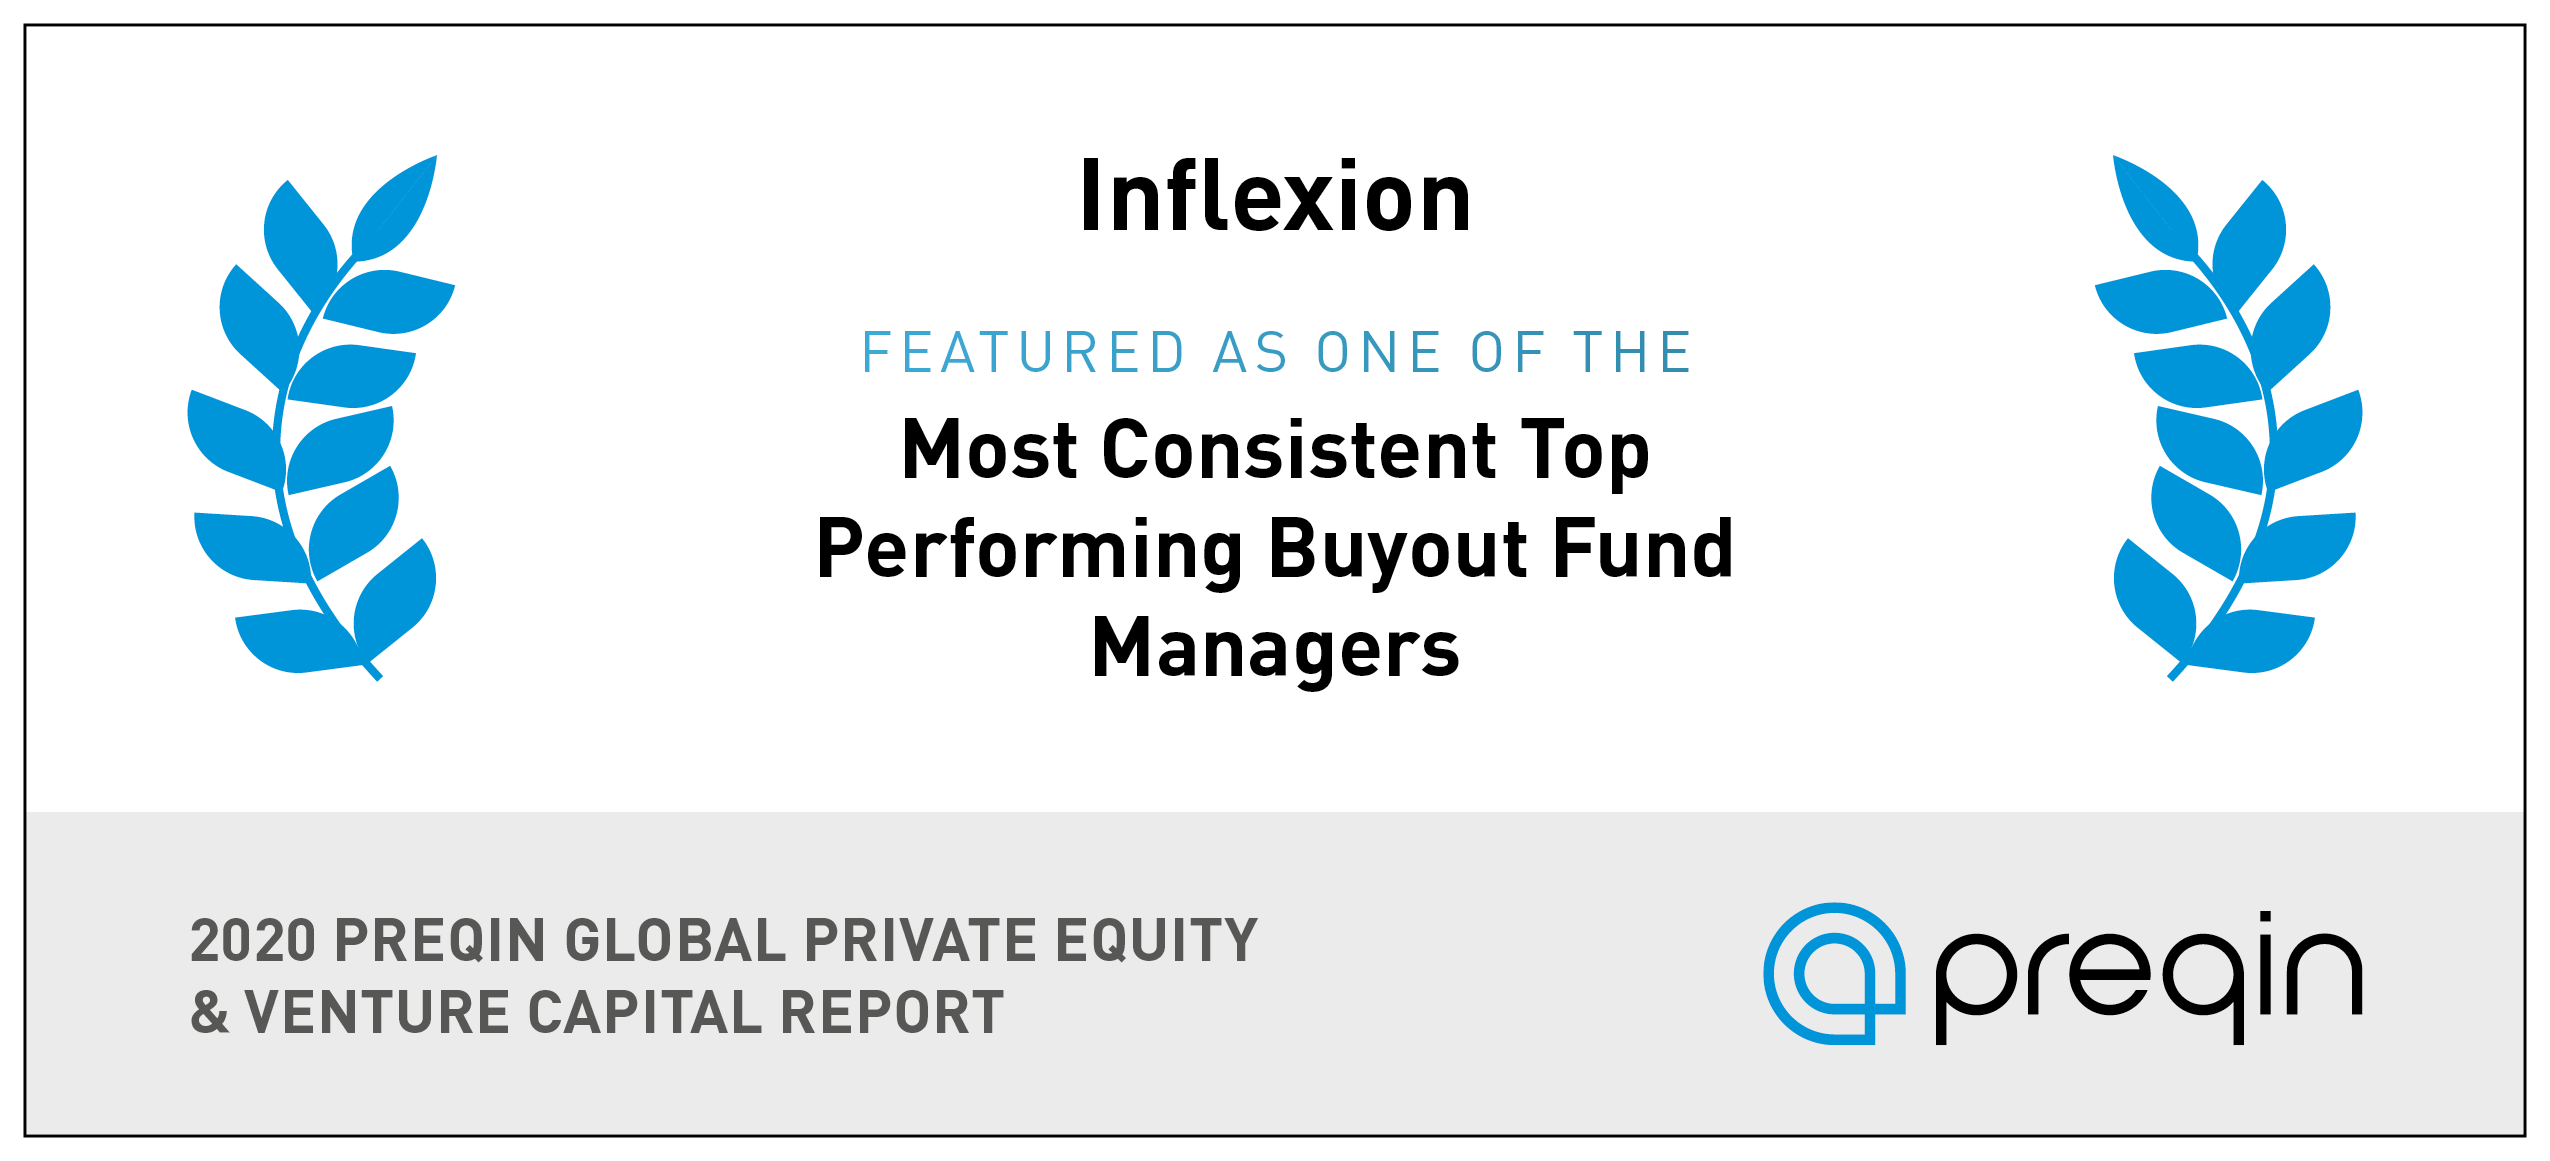 inflexion-featured-as-a-top-performing-buyout-fund-manager-by-prequin-inflexion